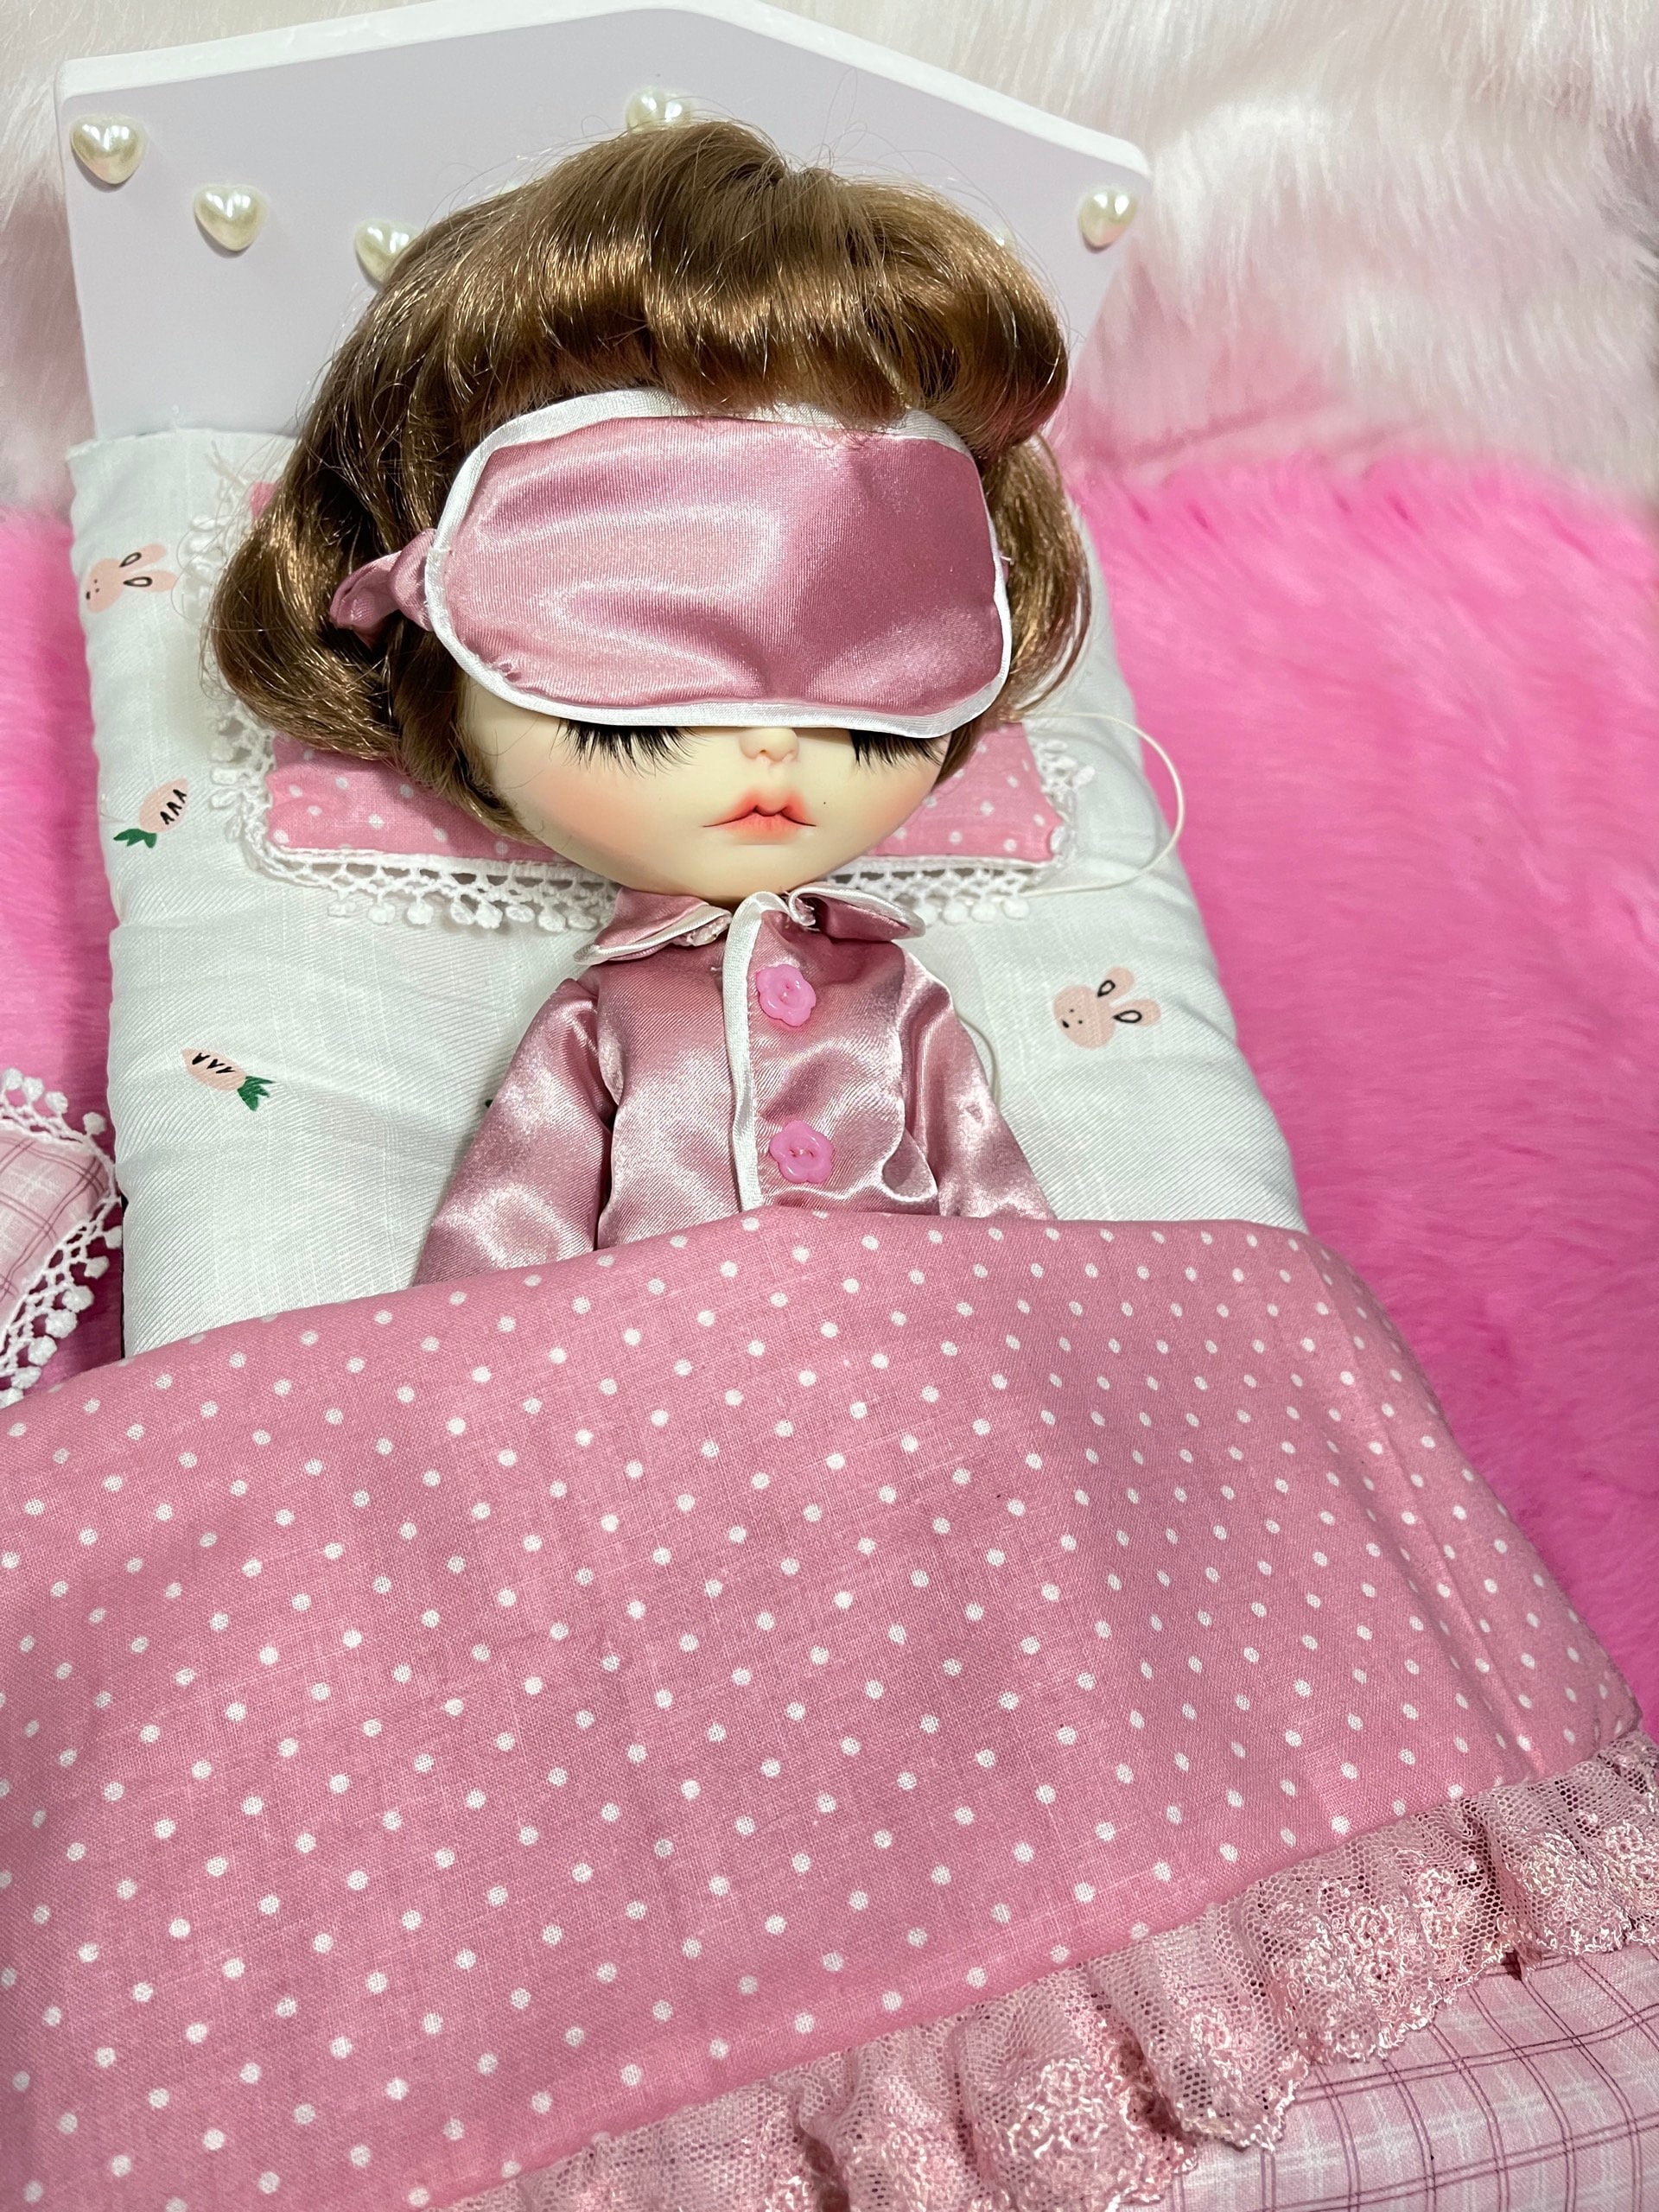 Blythe Outfit Handcrafted nightgown pajamas dress basaak doll pink 955-13 